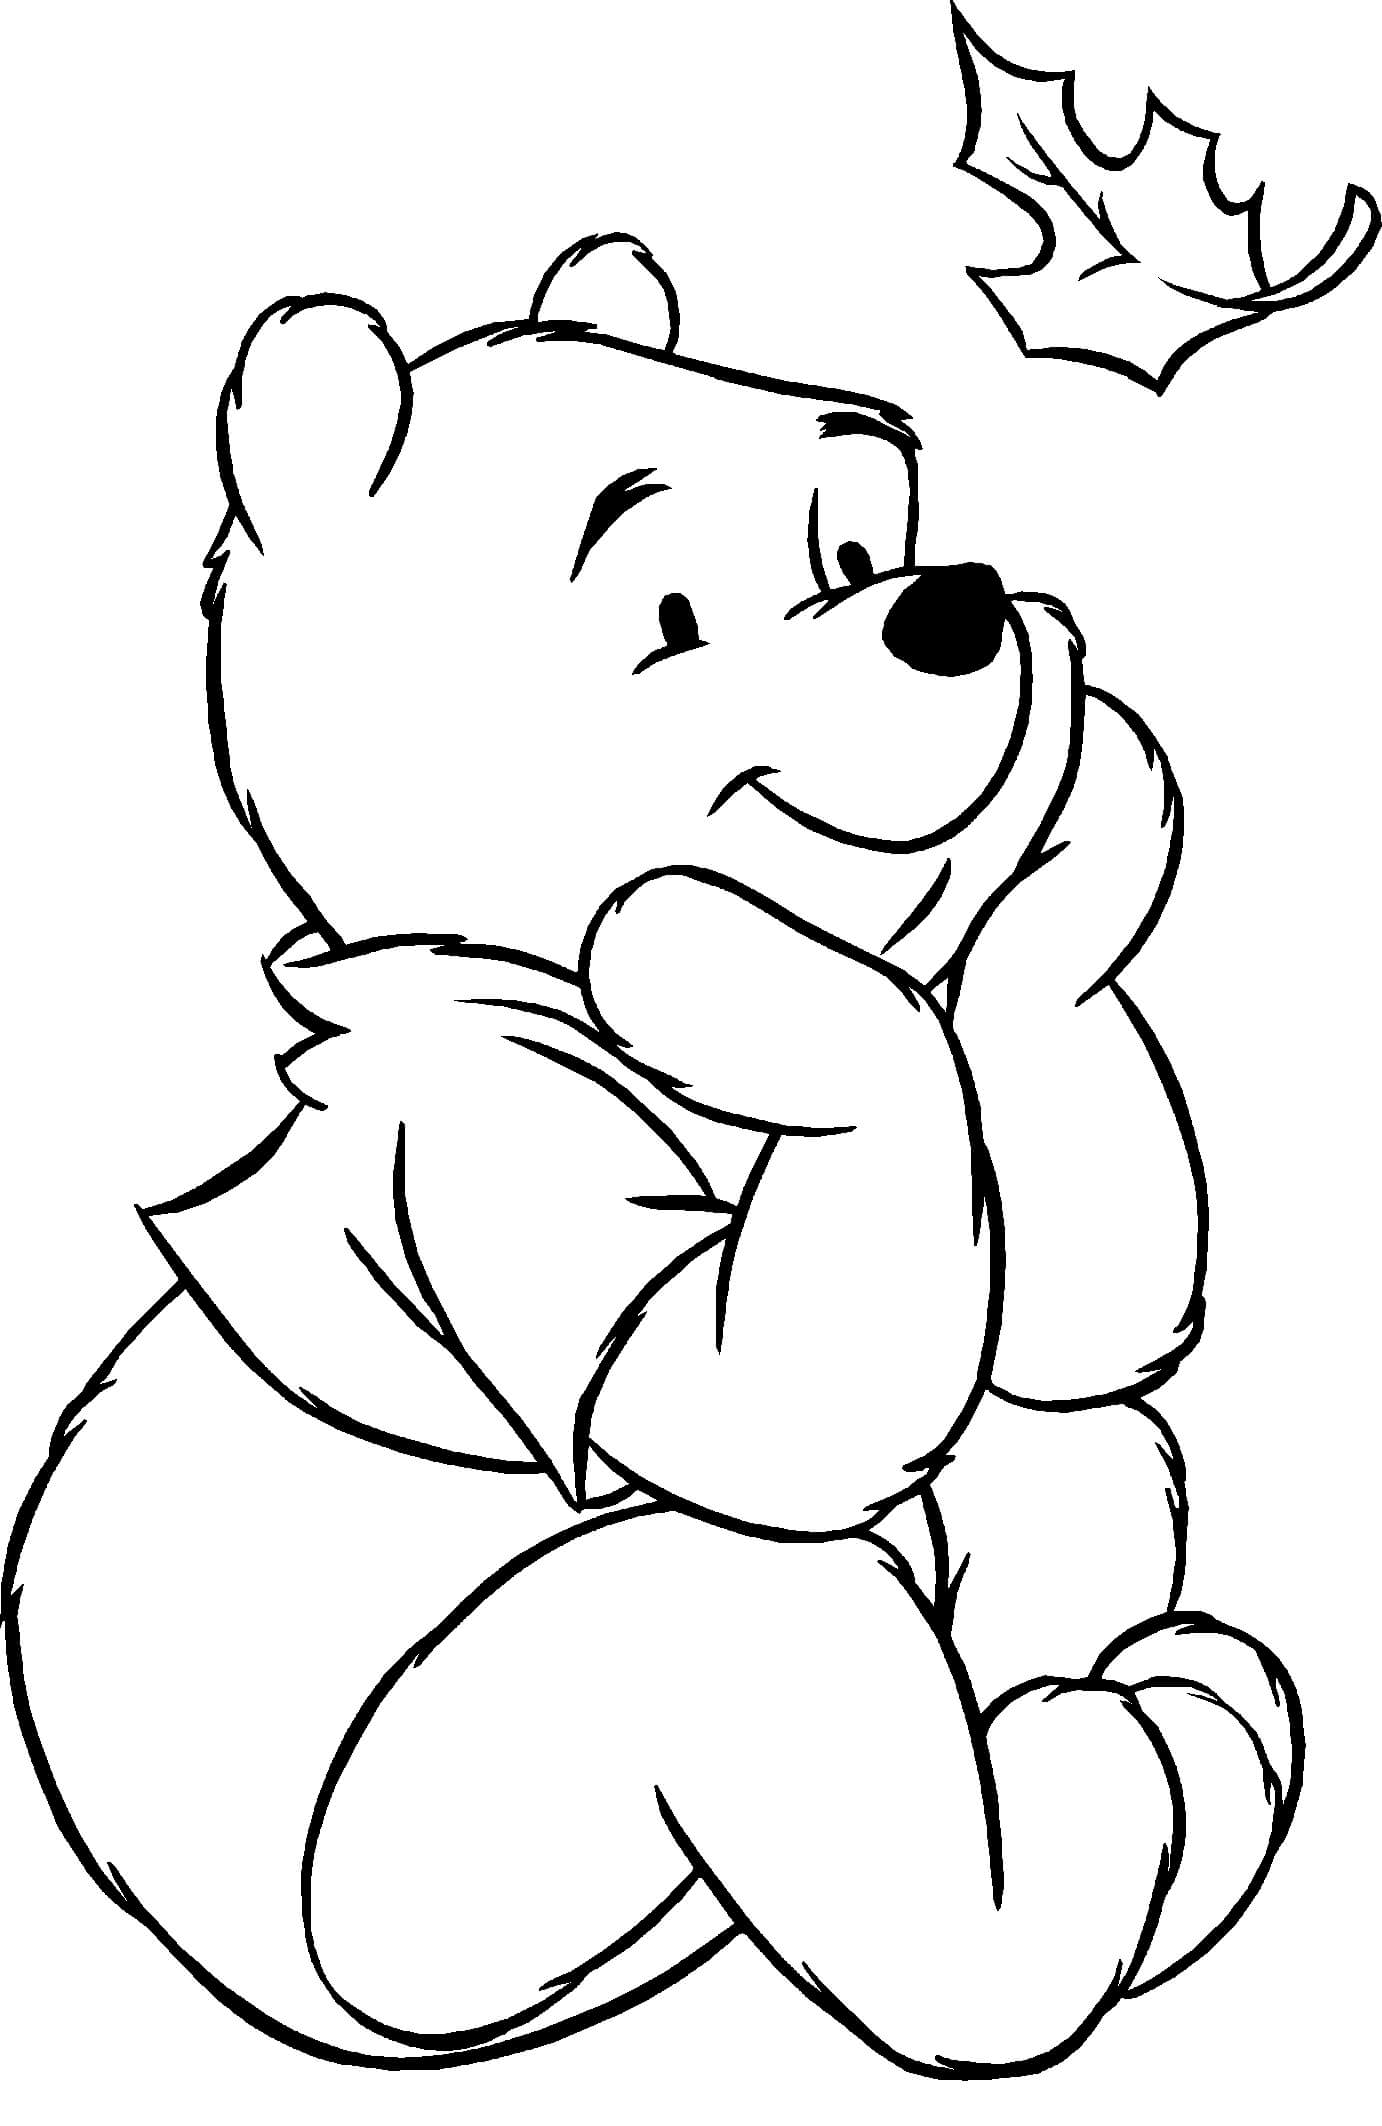 Fall Winnie the Pooh Coloring Pages